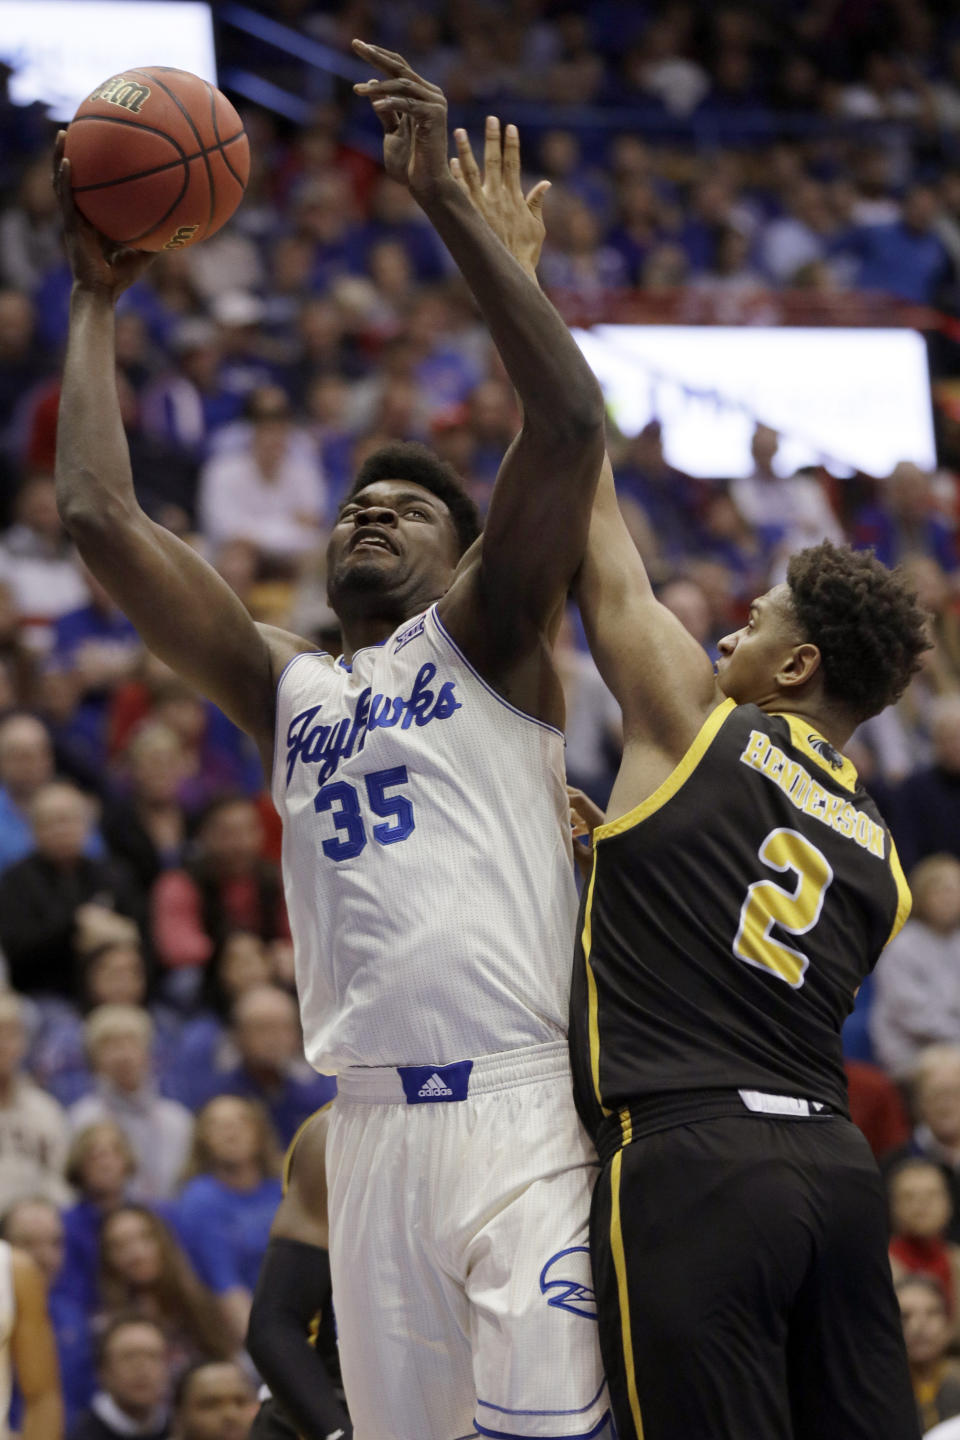 Kansas center Udoka Azubuike (35) shoots while defended by Milwaukee forward Harrison Henderson (2) during the first half of an NCAA college basketball game in Lawrence, Kan., Tuesday, Dec. 10, 2019. (AP Photo/Orlin Wagner)